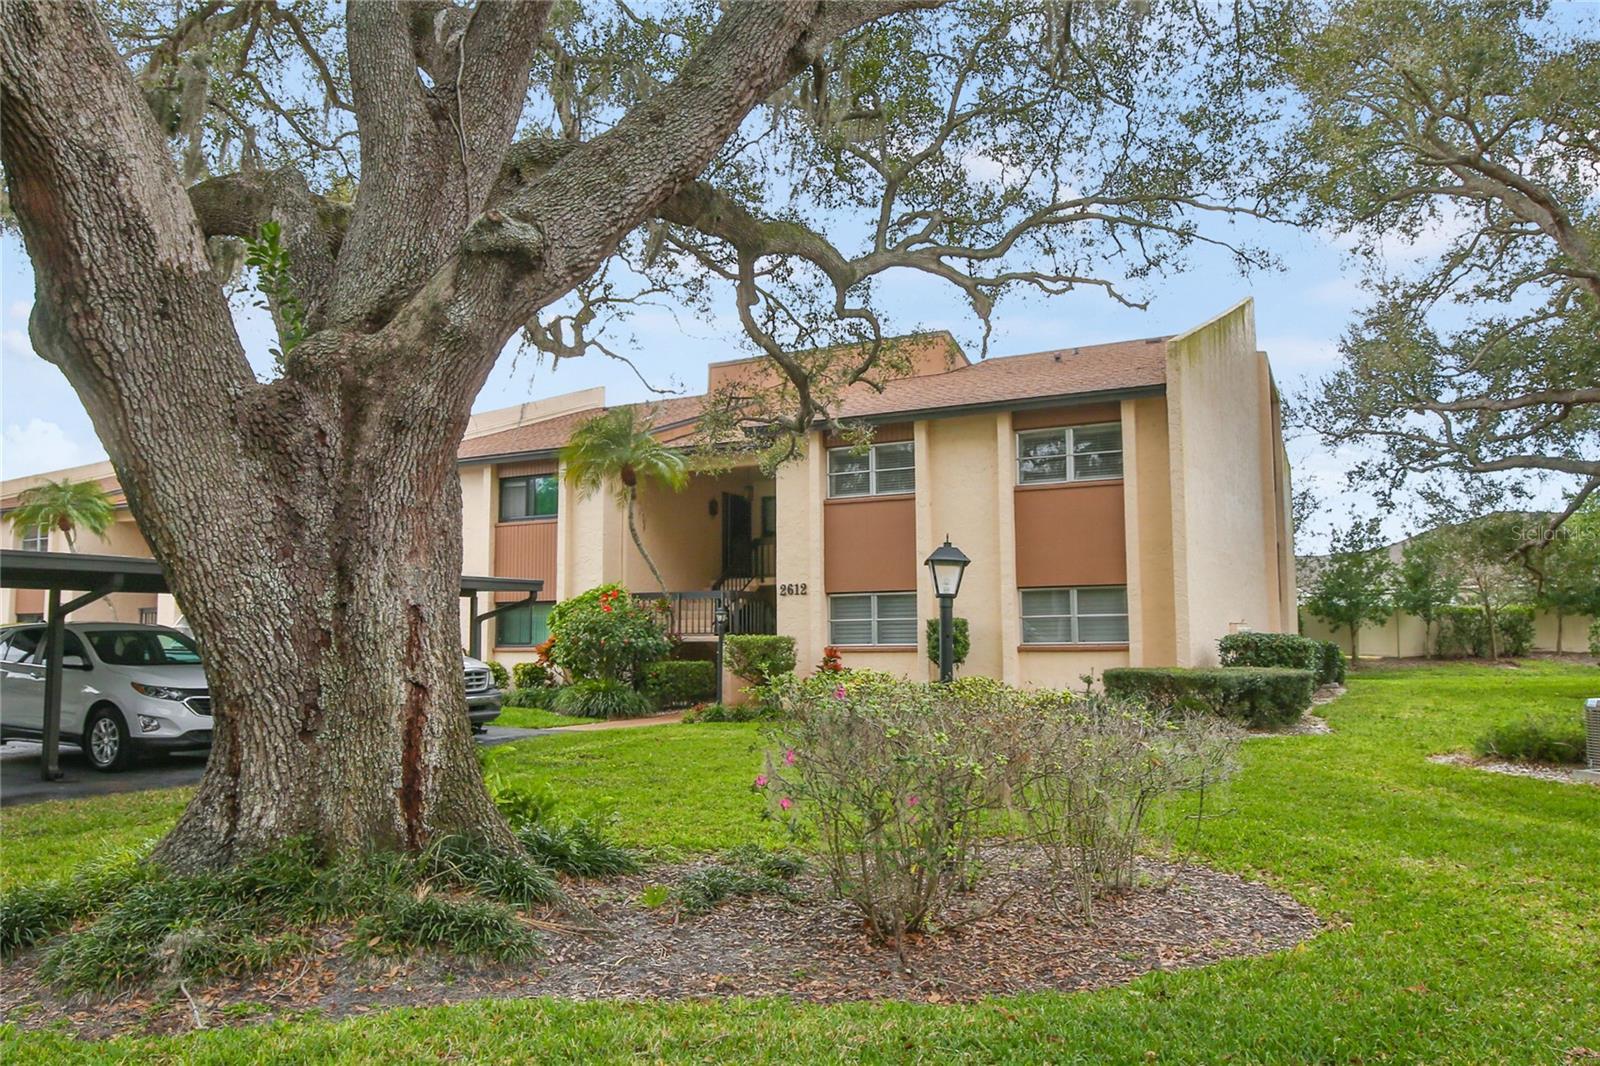 Photo one of 2612 Clubhouse Dr # 204 Sarasota FL 34232 | MLS A4597095